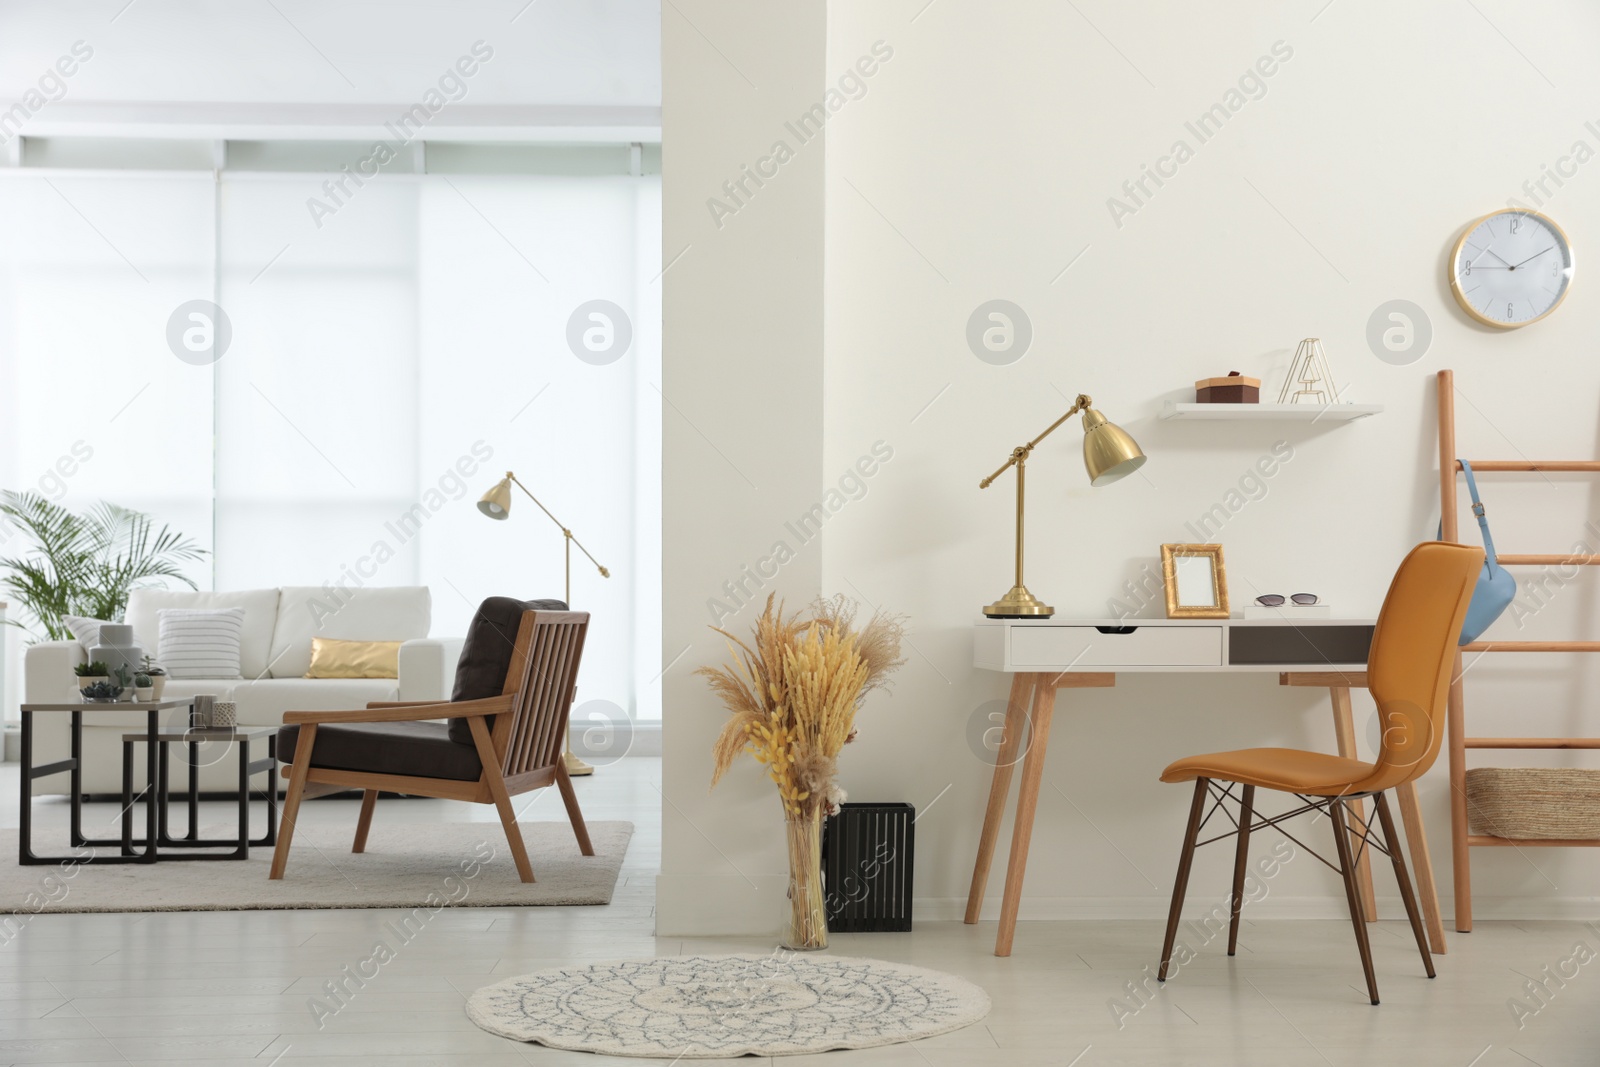 Photo of Living room and workplace in spacious apartment. Interior design